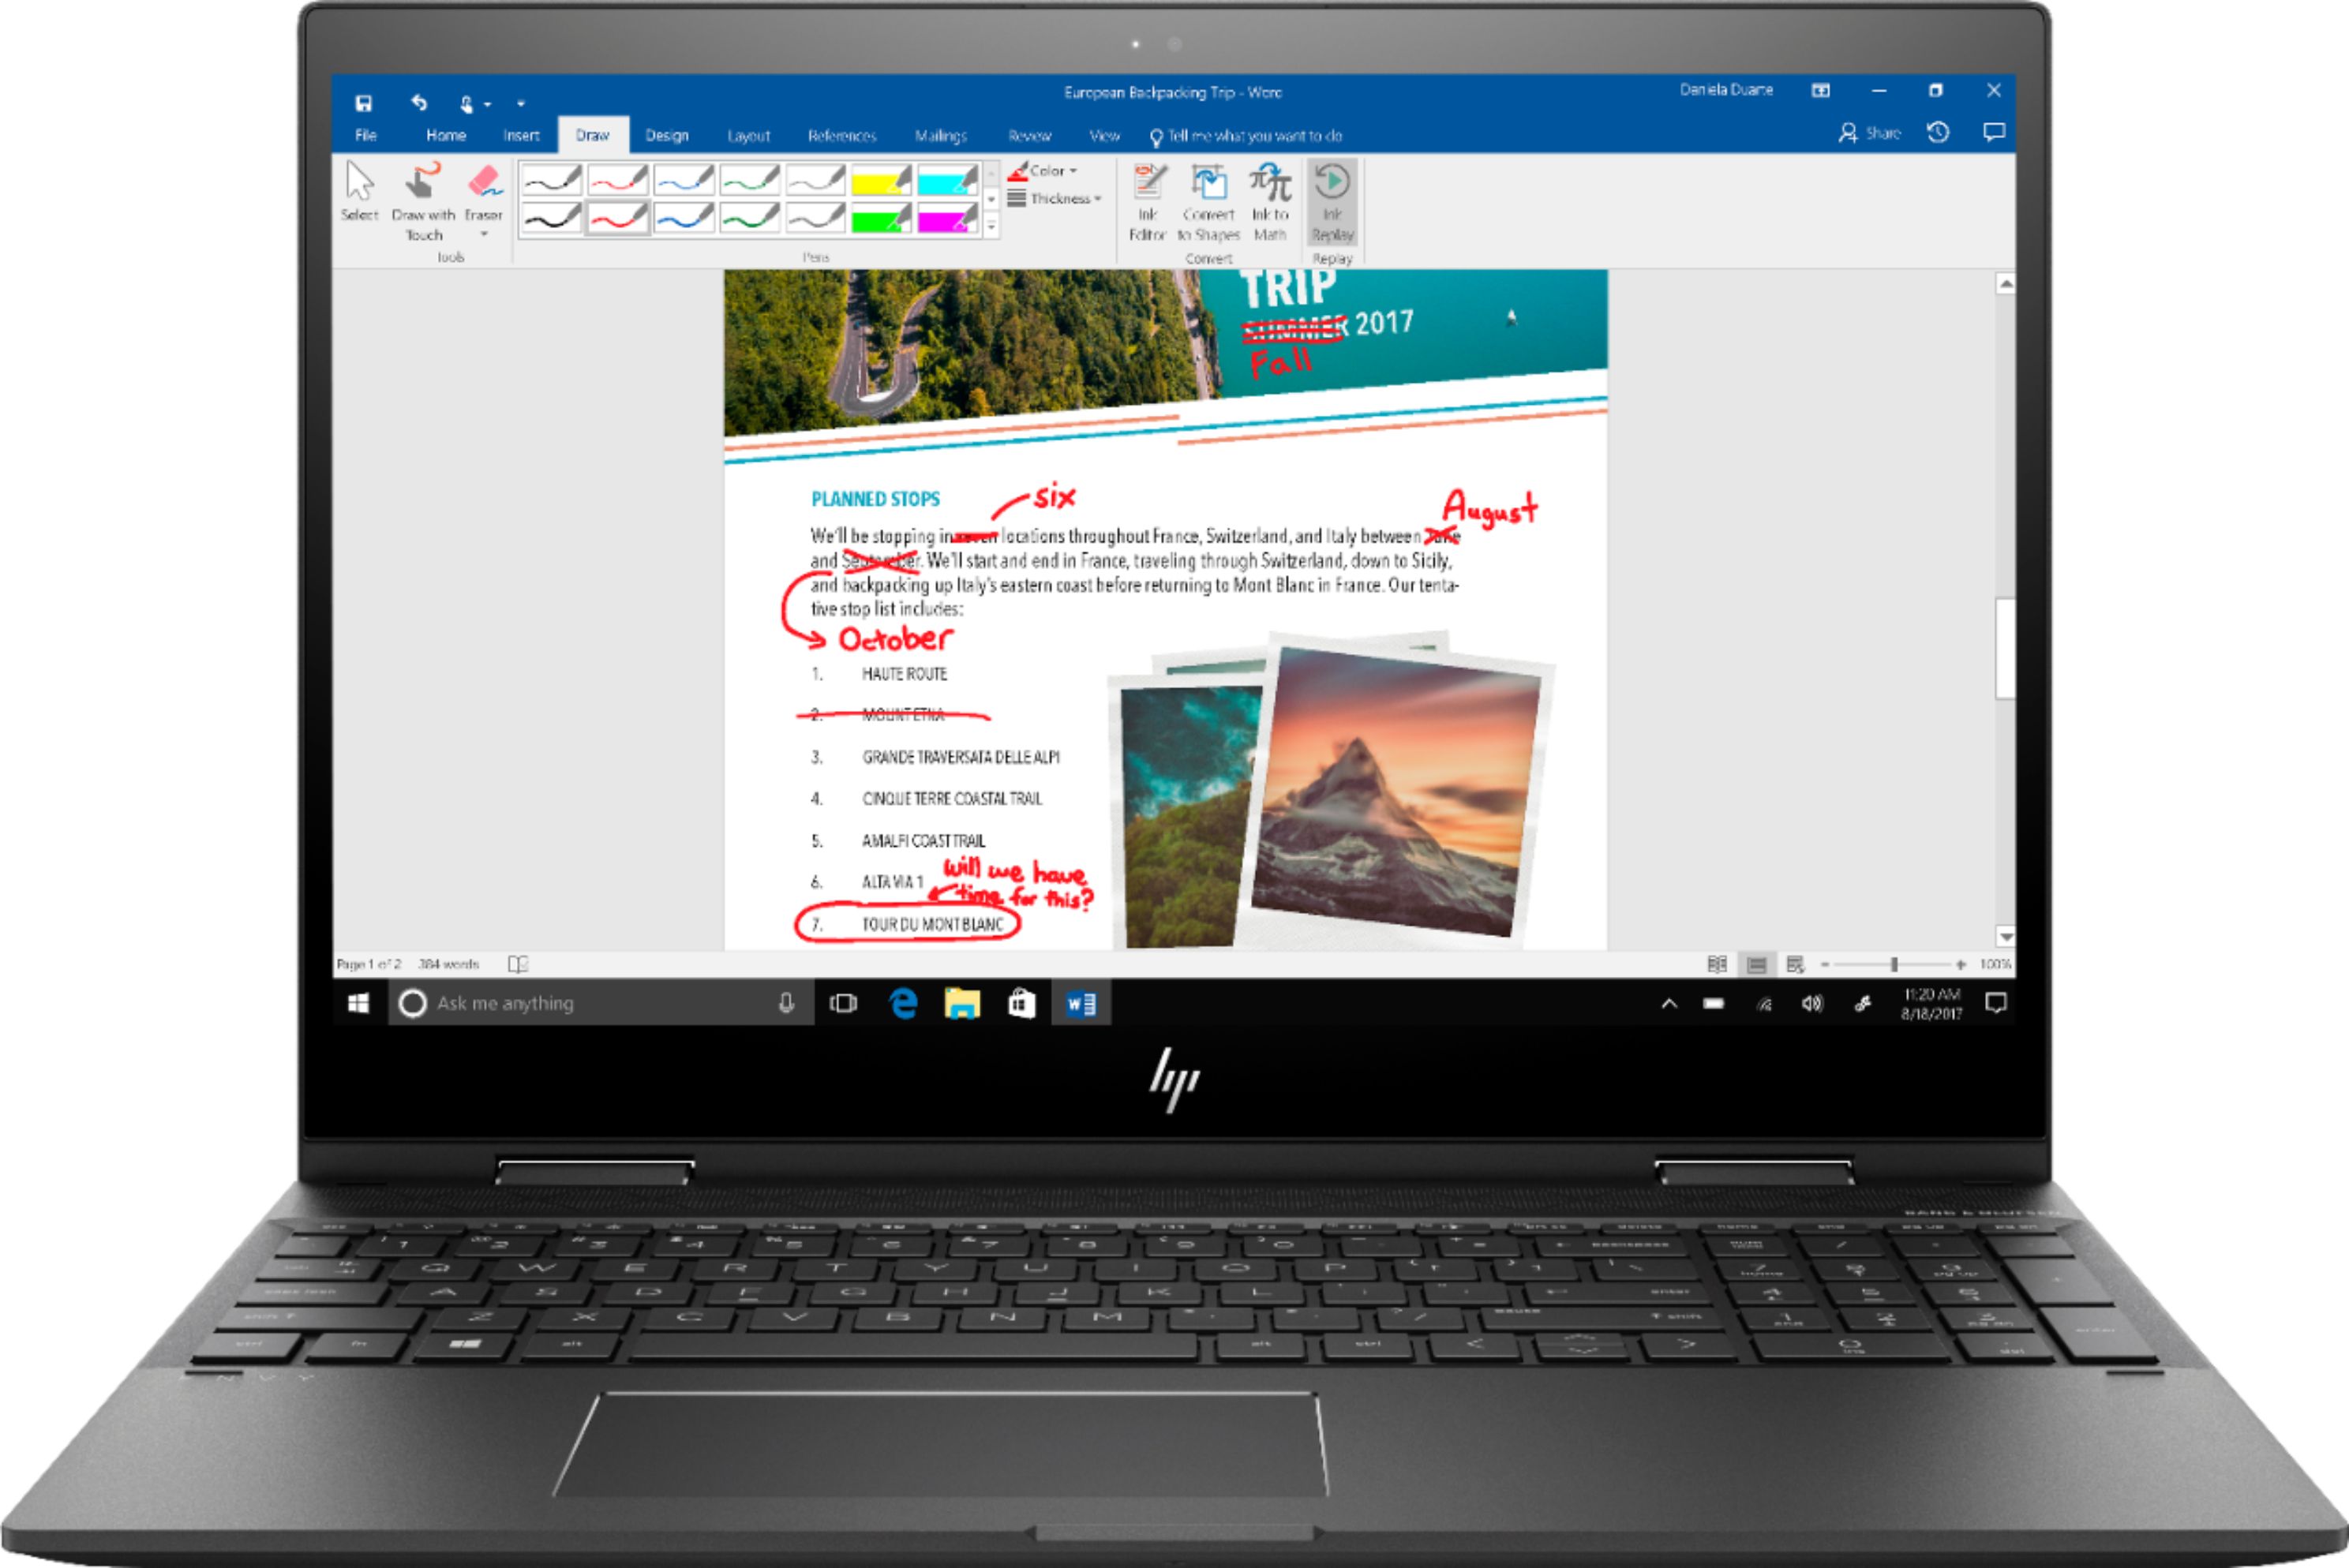 Why Should You Consider Upgrading To The HP Envy x360 Laptop